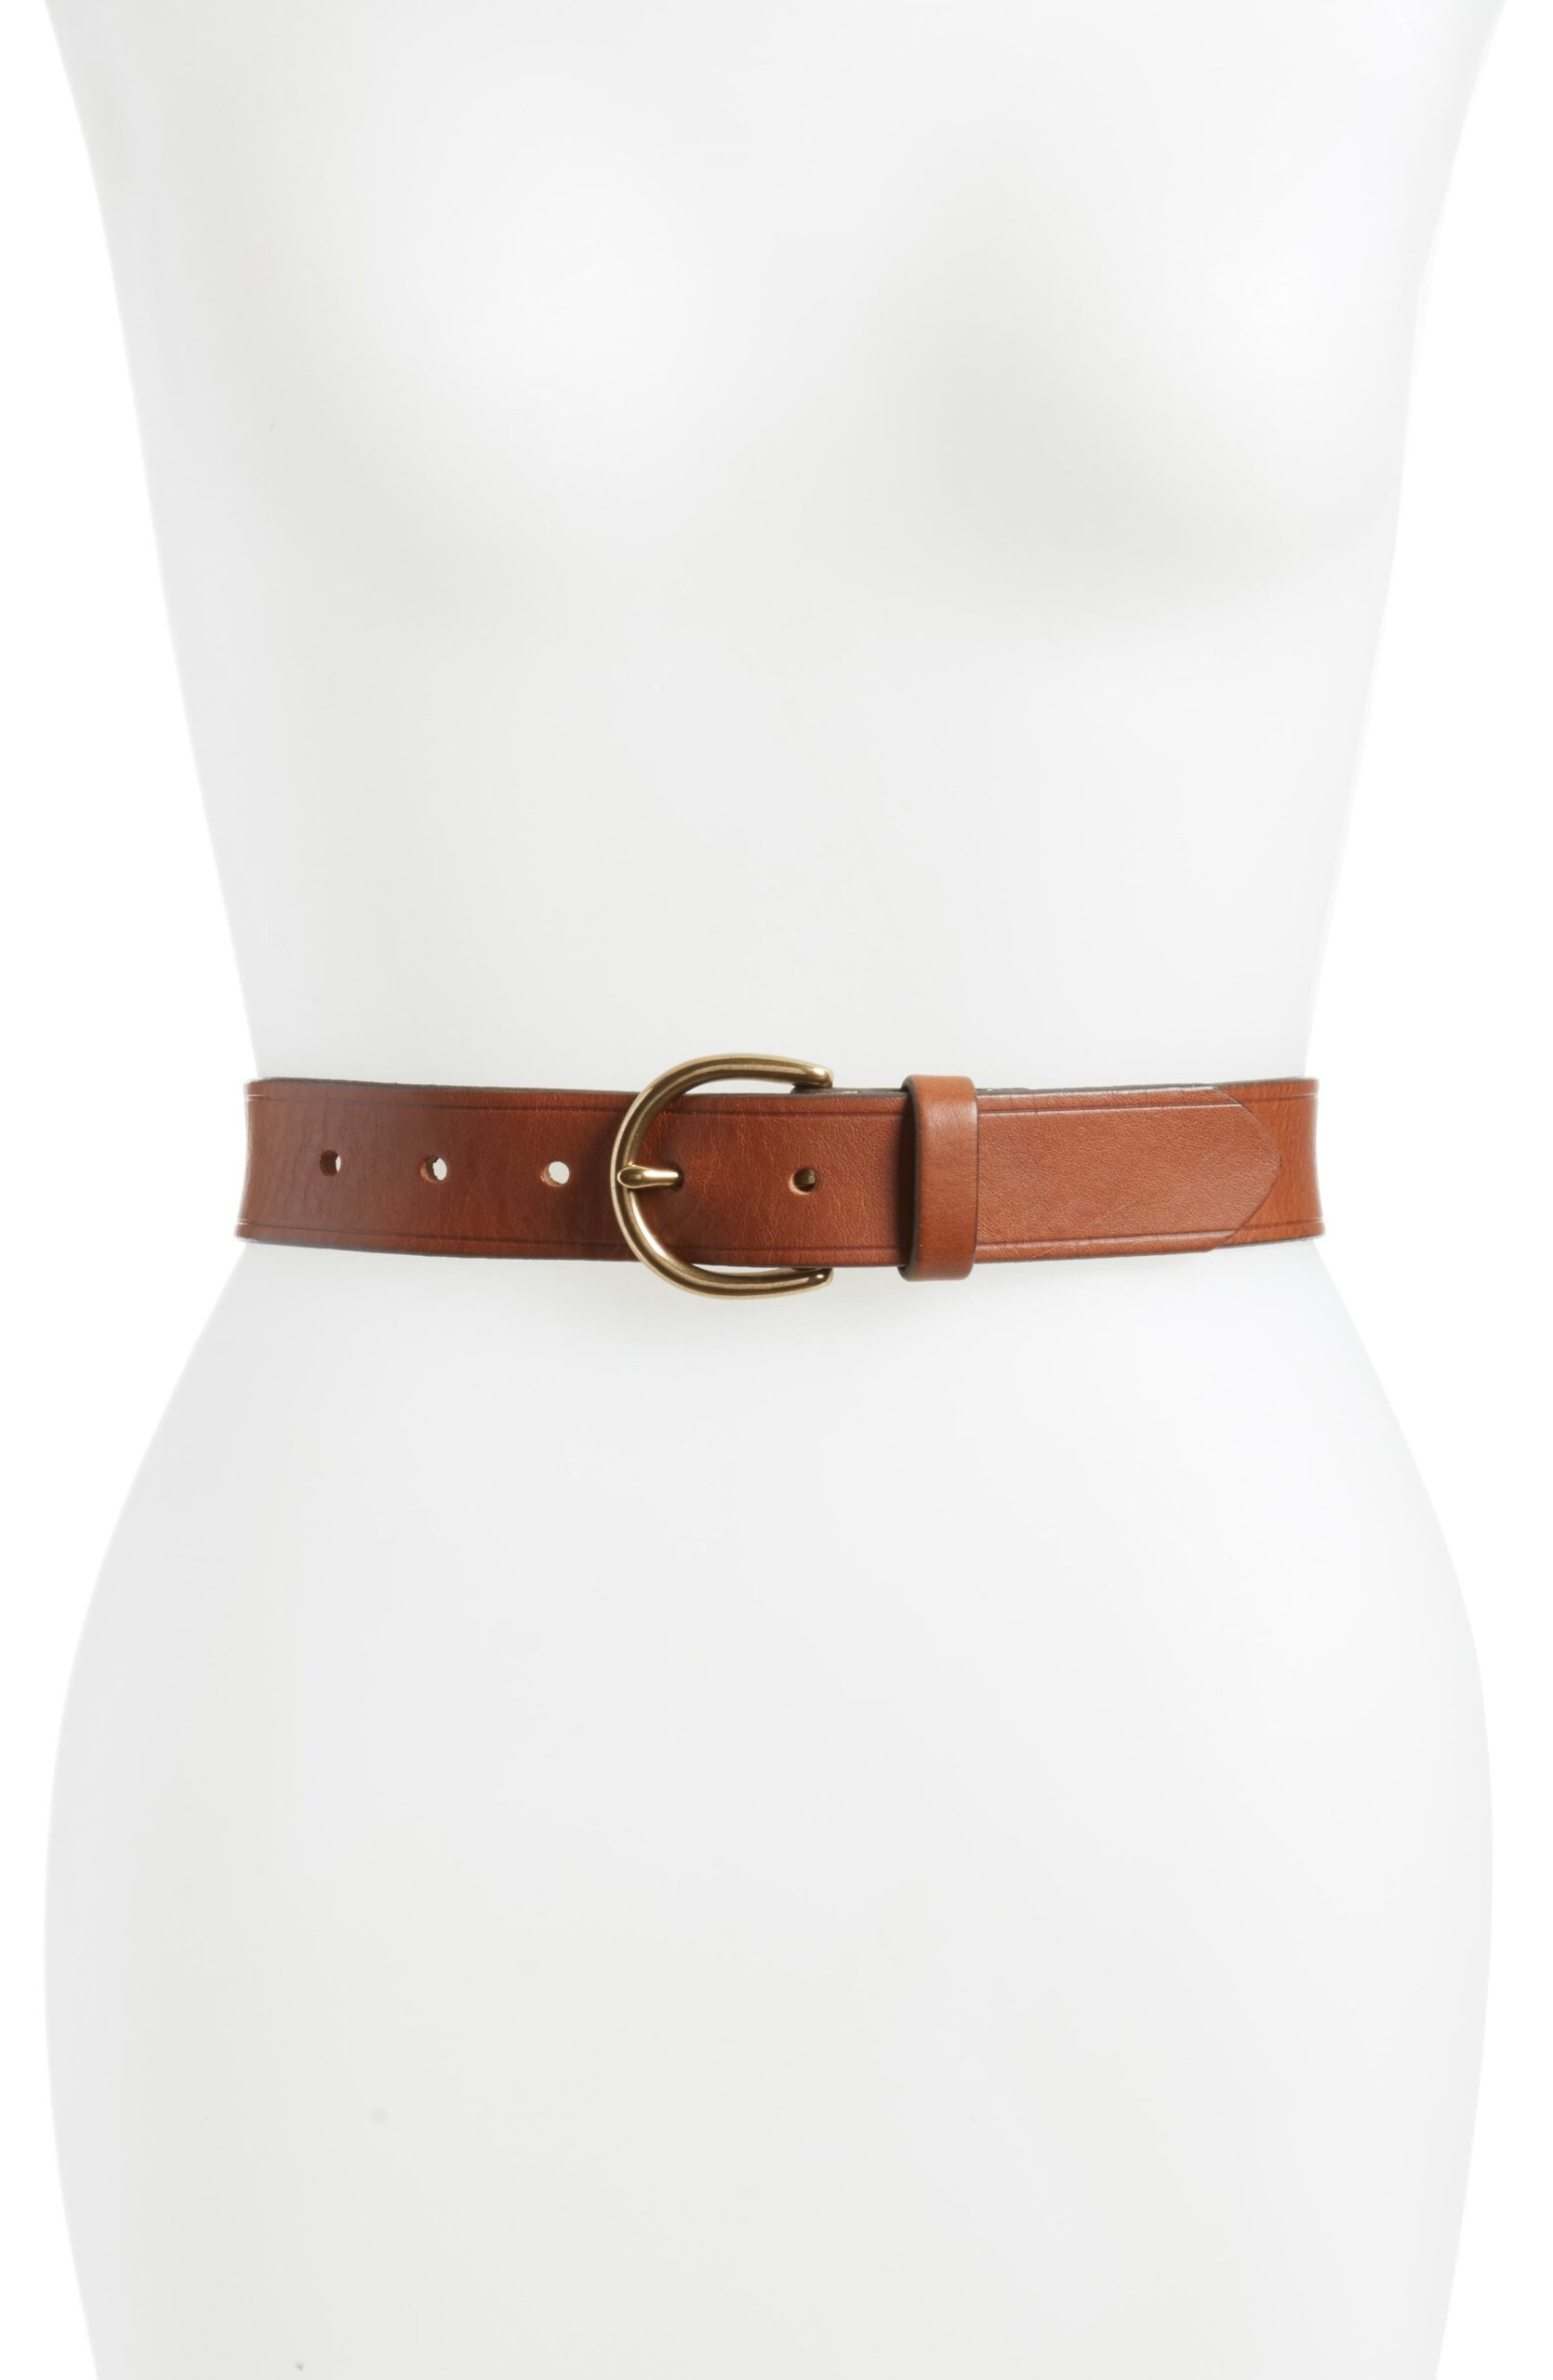 Chic Brown Belts for Versatile Accessories